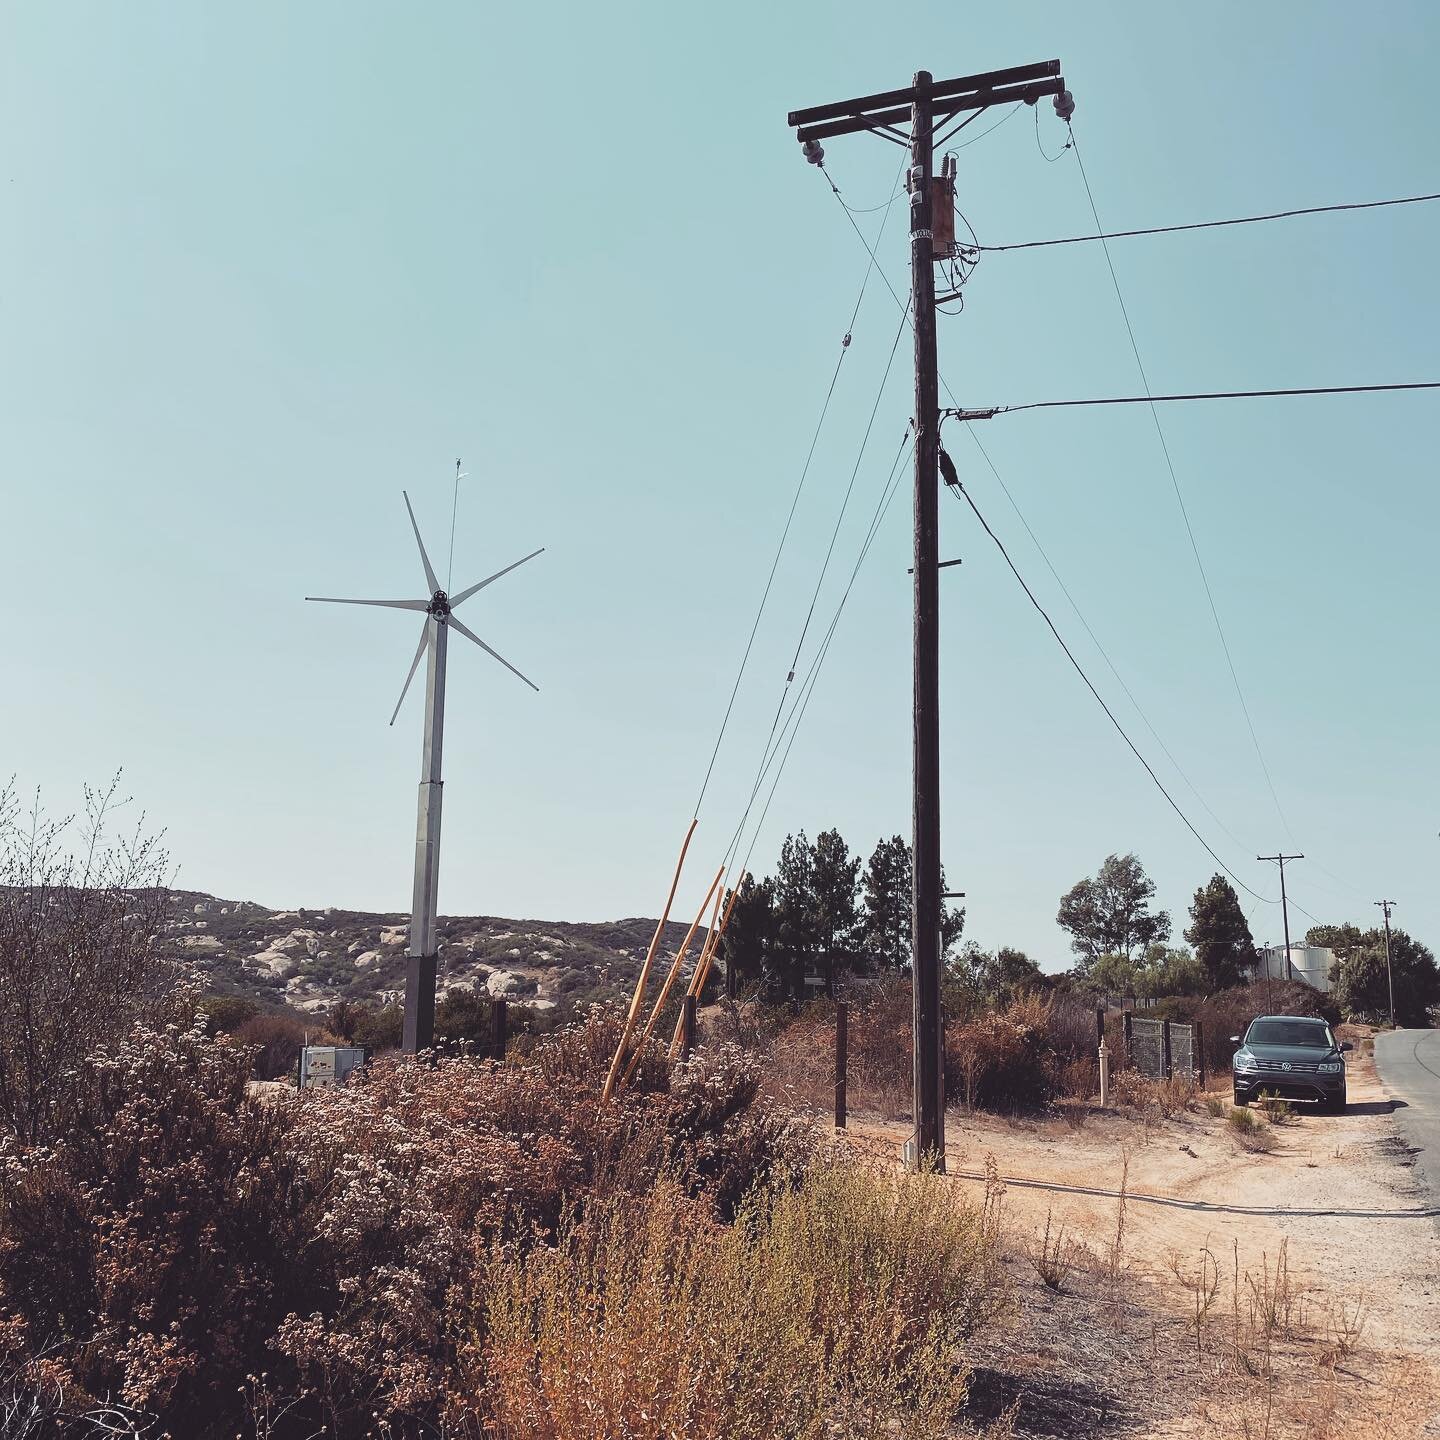 Old School vs New School

The juxtaposition of our portable #windturbine setup next to a traditional #powerpole illustrates how nicely our #distributedenergy resource blends with the landscape and offers a glimpse into the future of edge of grid #ele